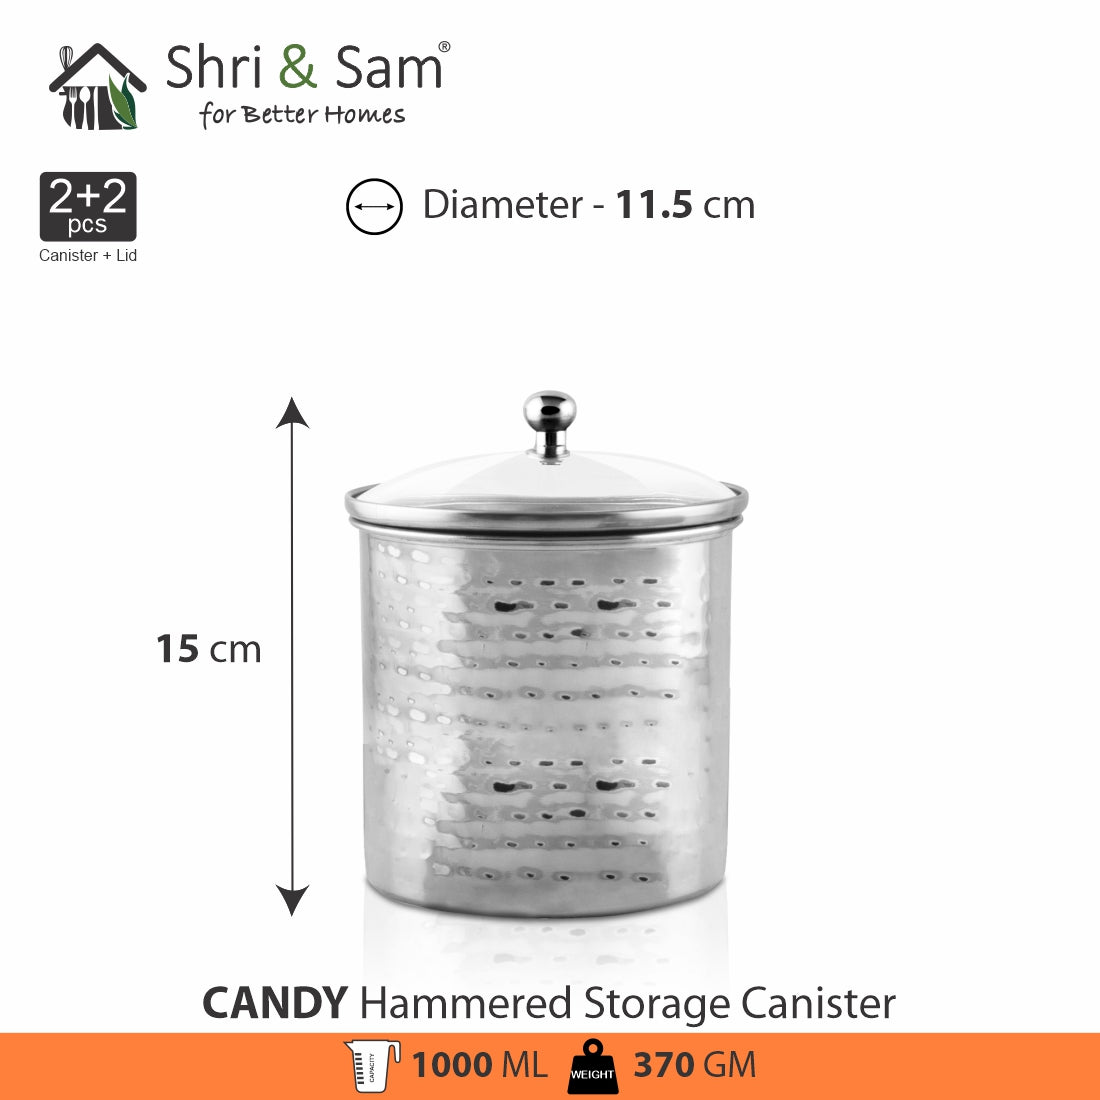 Stainless Steel 2 PCS 1000 ML Hammered Storage Canister with Air Tight Glass Lid Candy